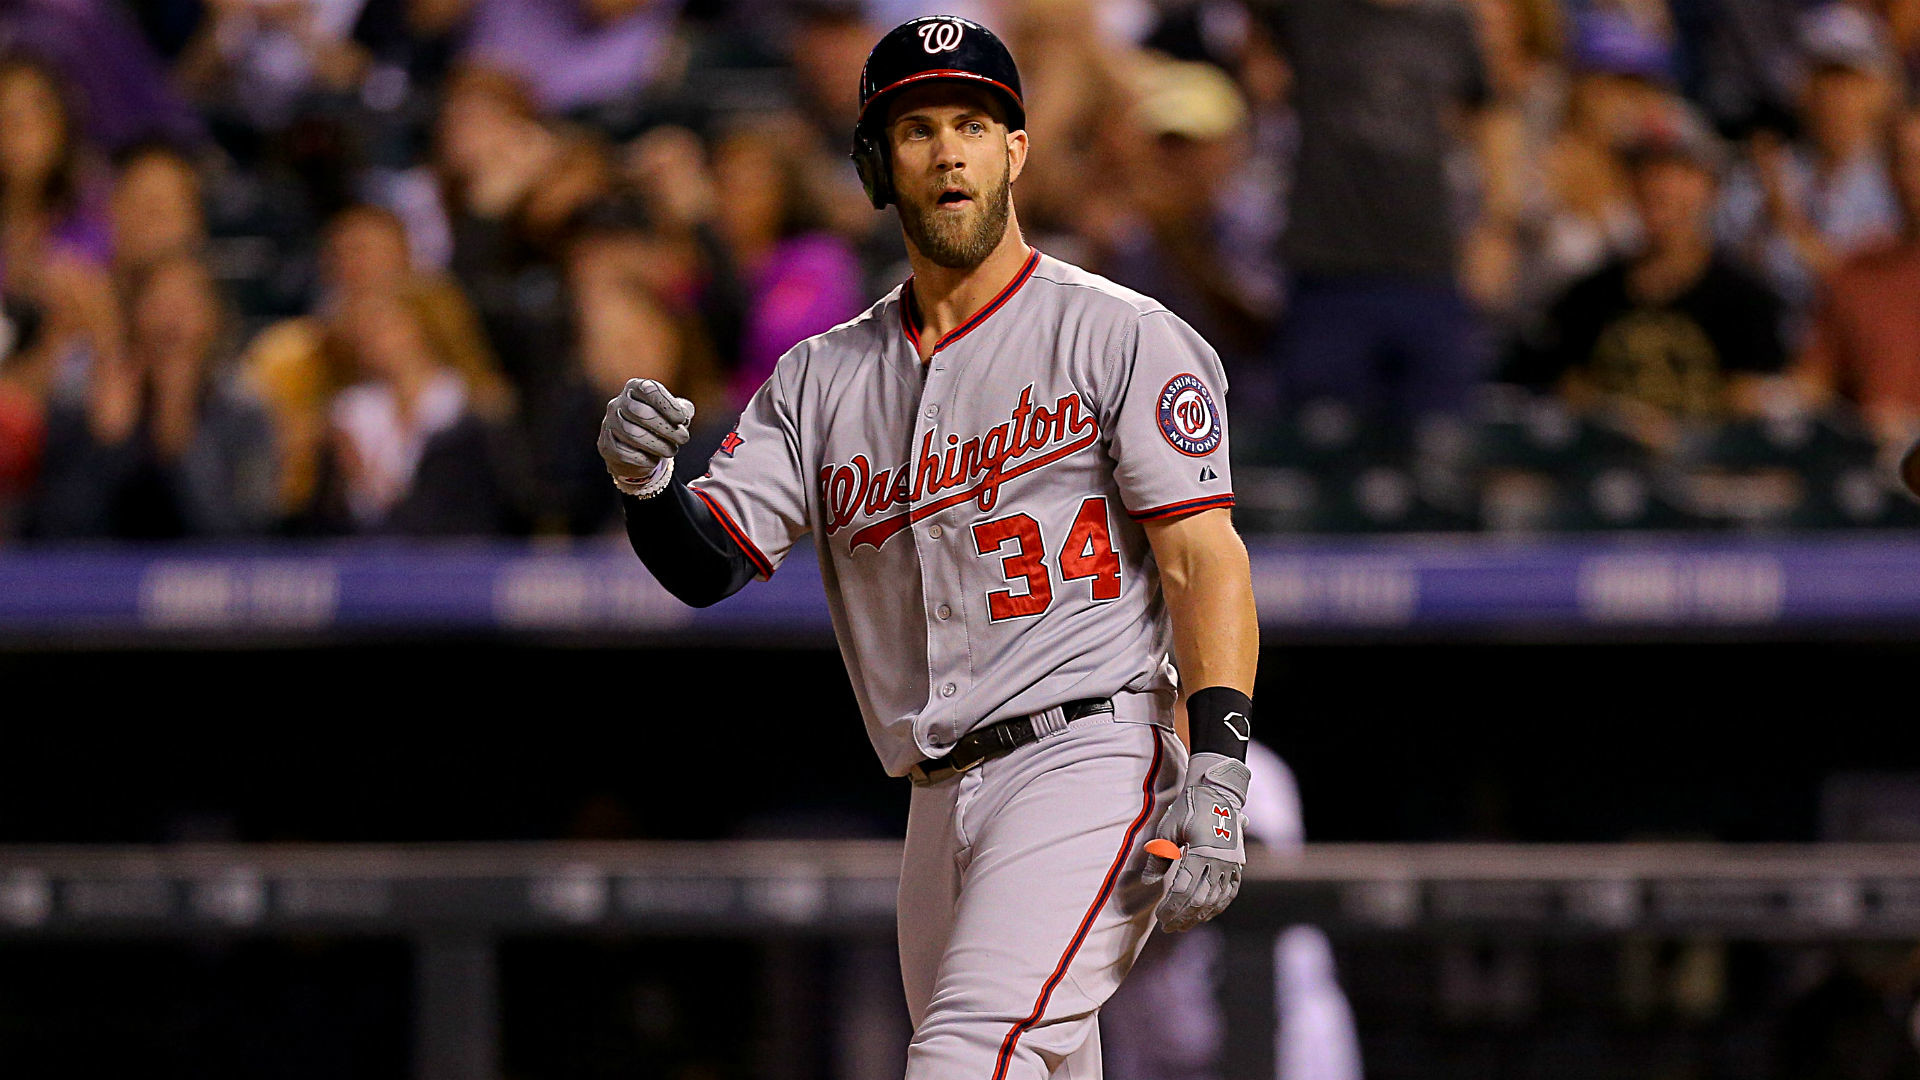 Bryce Harper fields 400 million question Dont sell me short MLB Sporting News